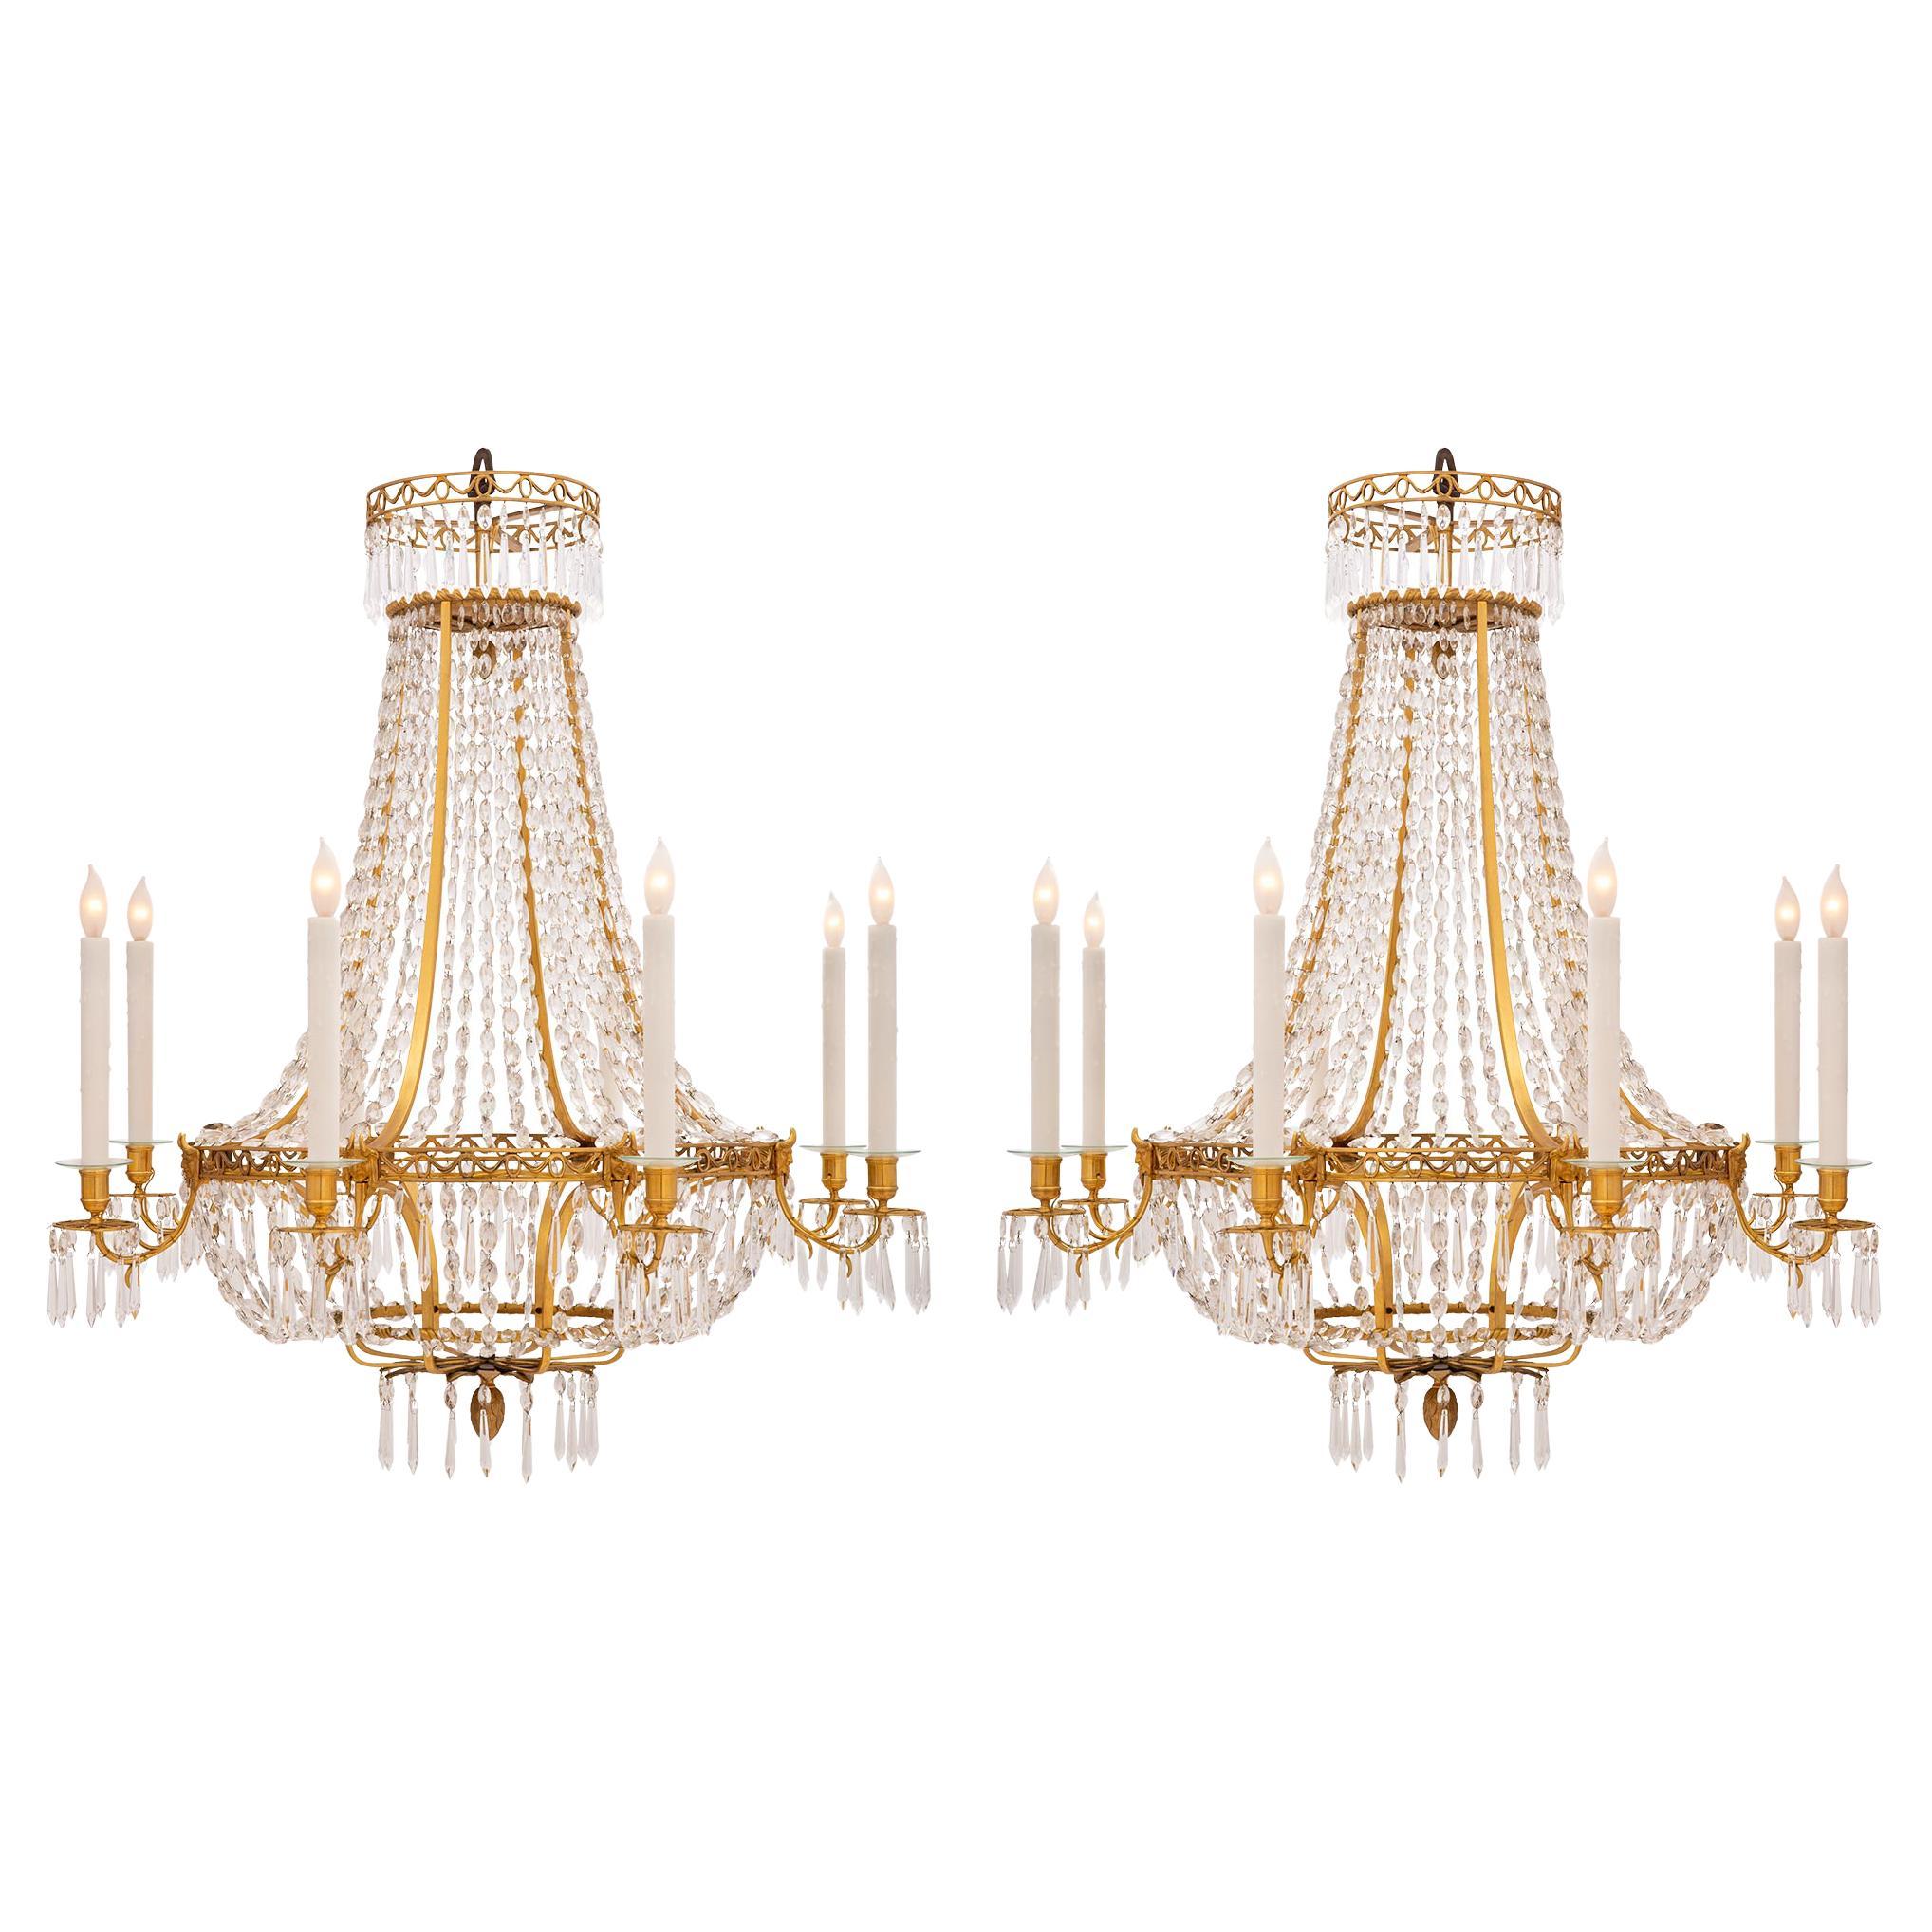 Pair of 19th Century Neoclassical Style Ormolu and Crystal Chandeliers For Sale